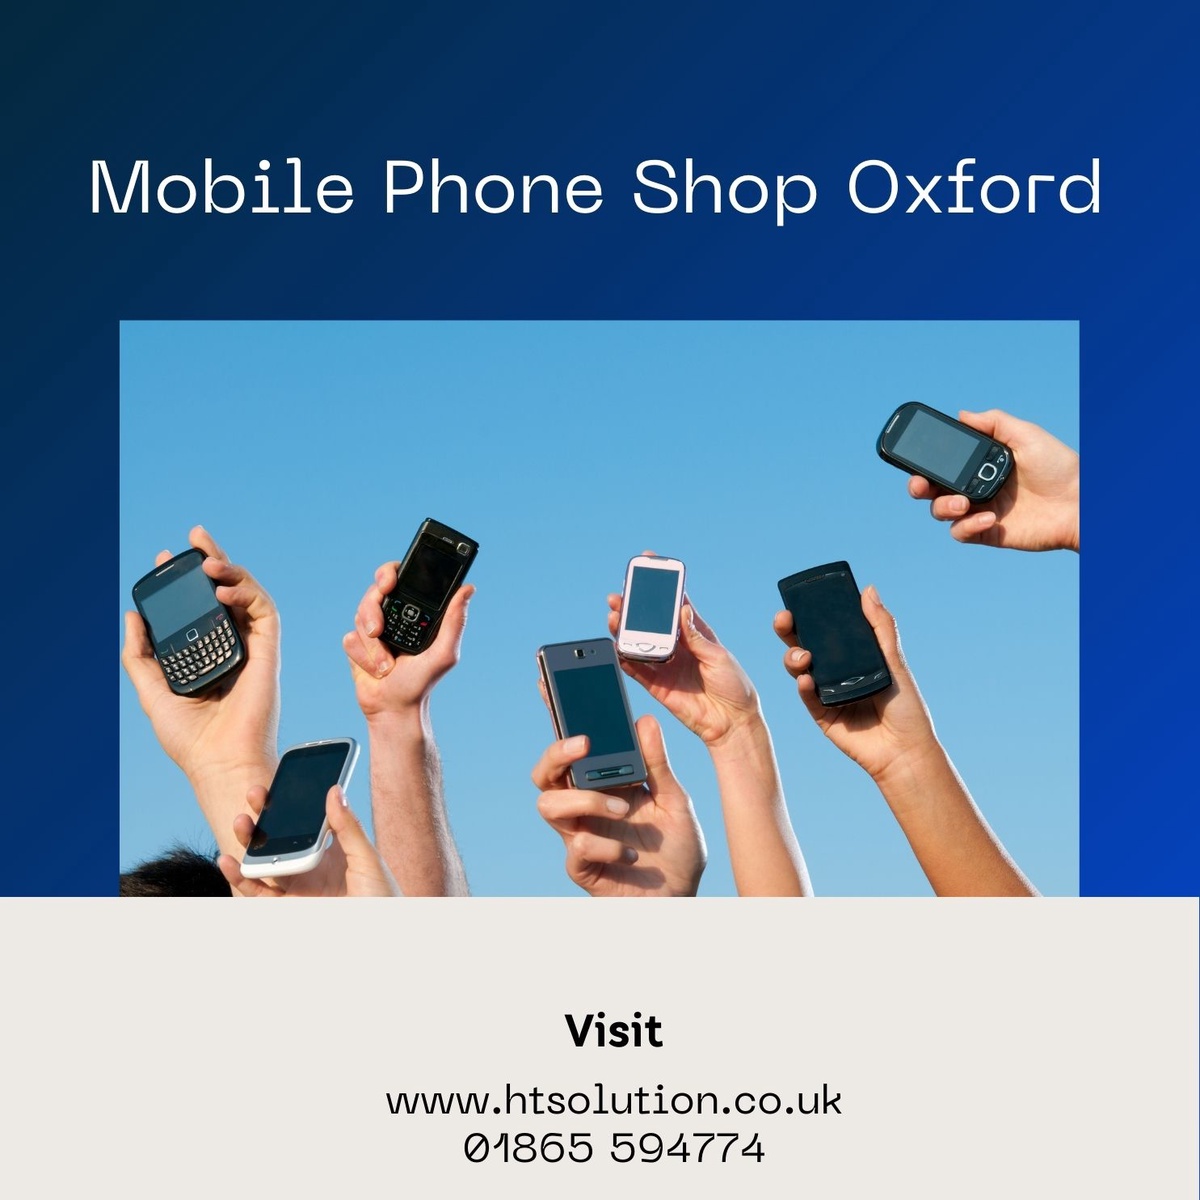 For all your Mobile Phone Needs in Oxford, HitecSolutions is Your Ultimate Destination